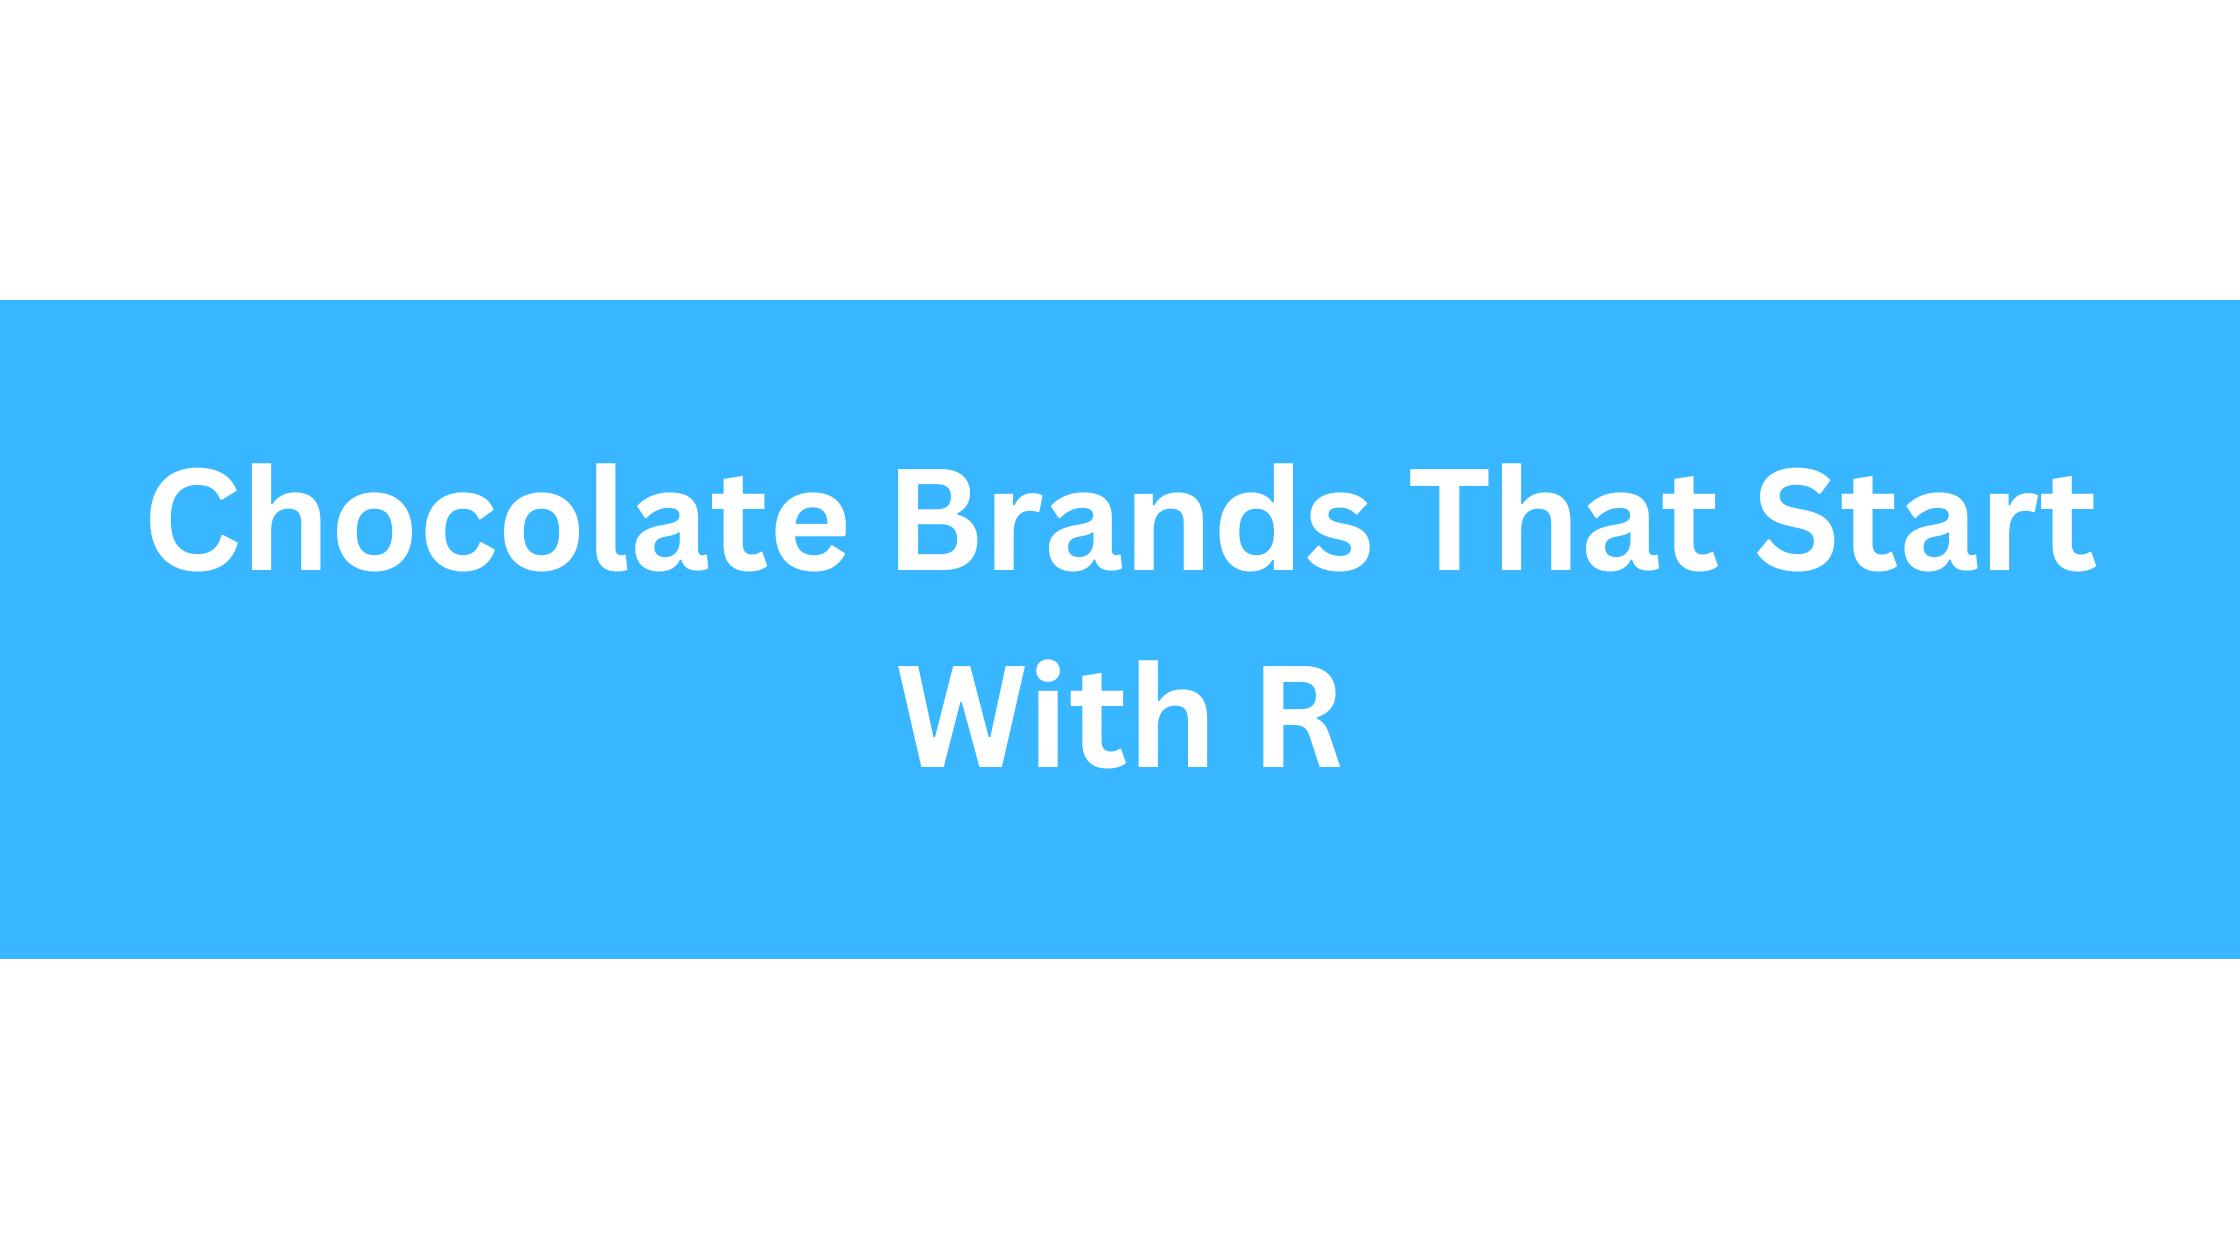 Chocolate Brands That Start With R